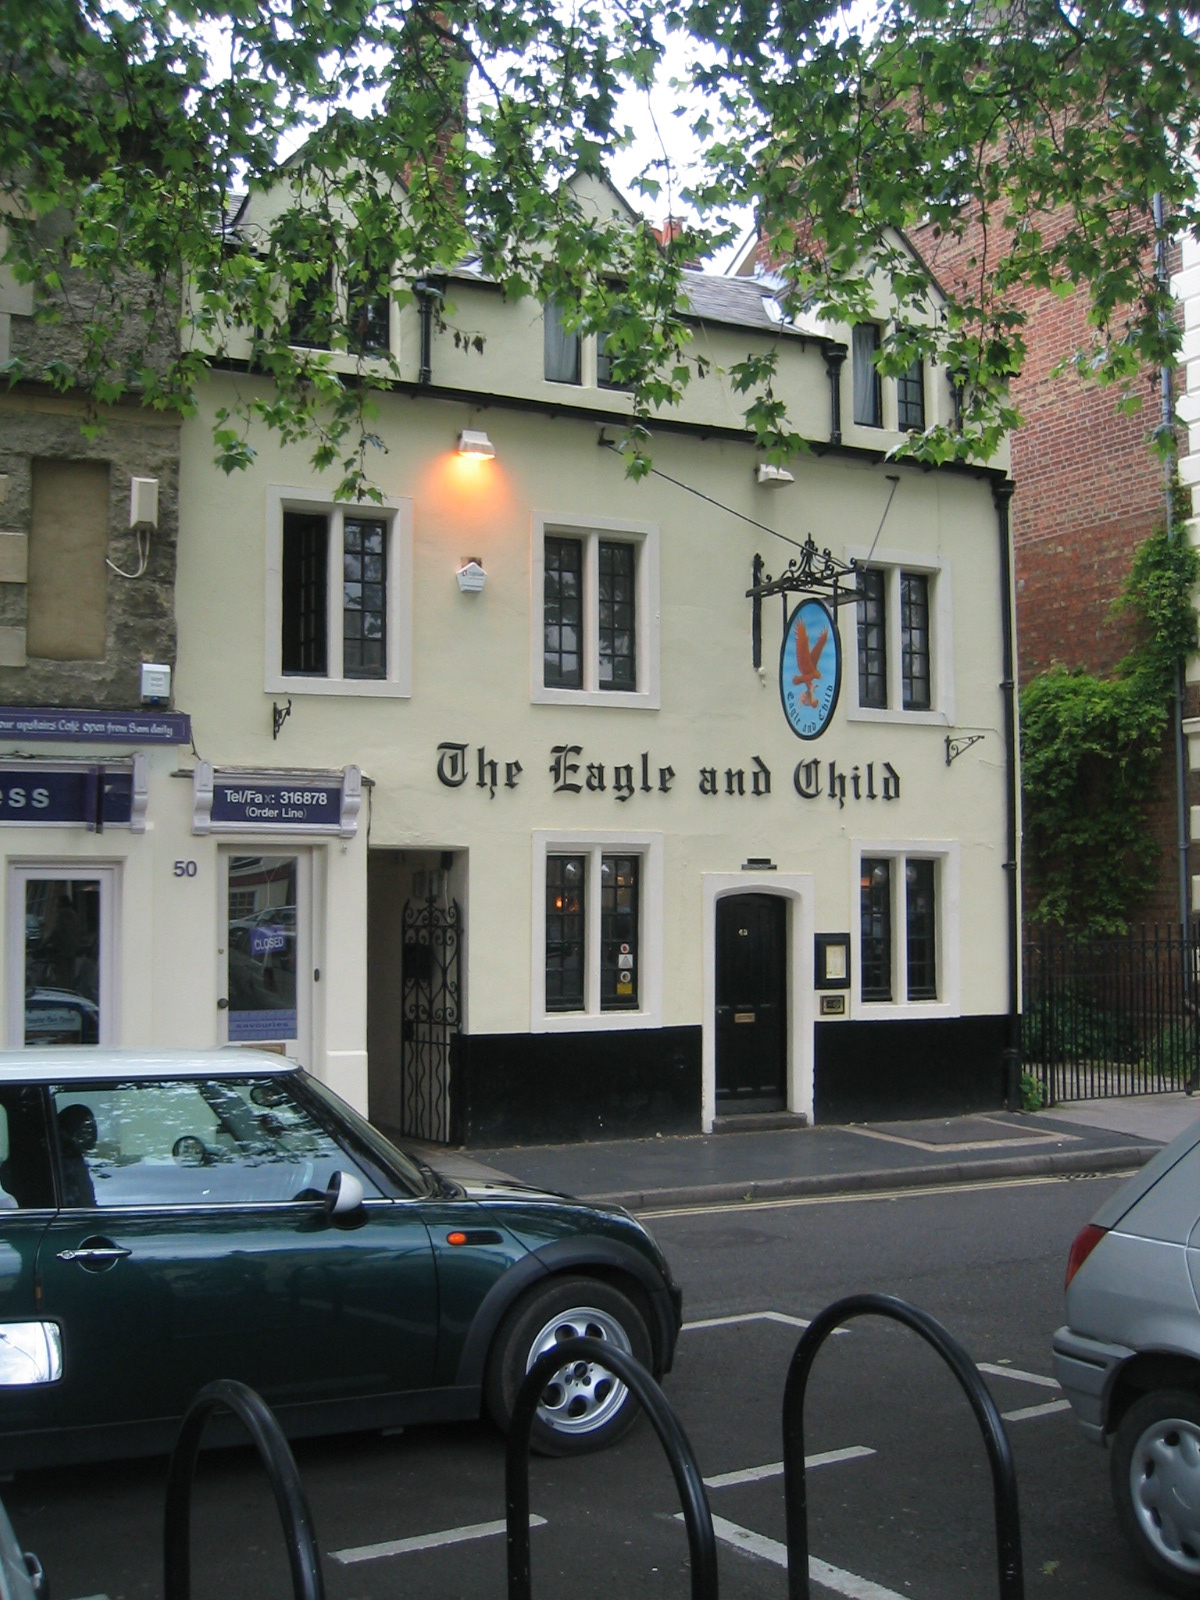 The Eagle and Child pub in Oxford where the Inklings met in 1939 / Public Domain / Wikimedia Commons